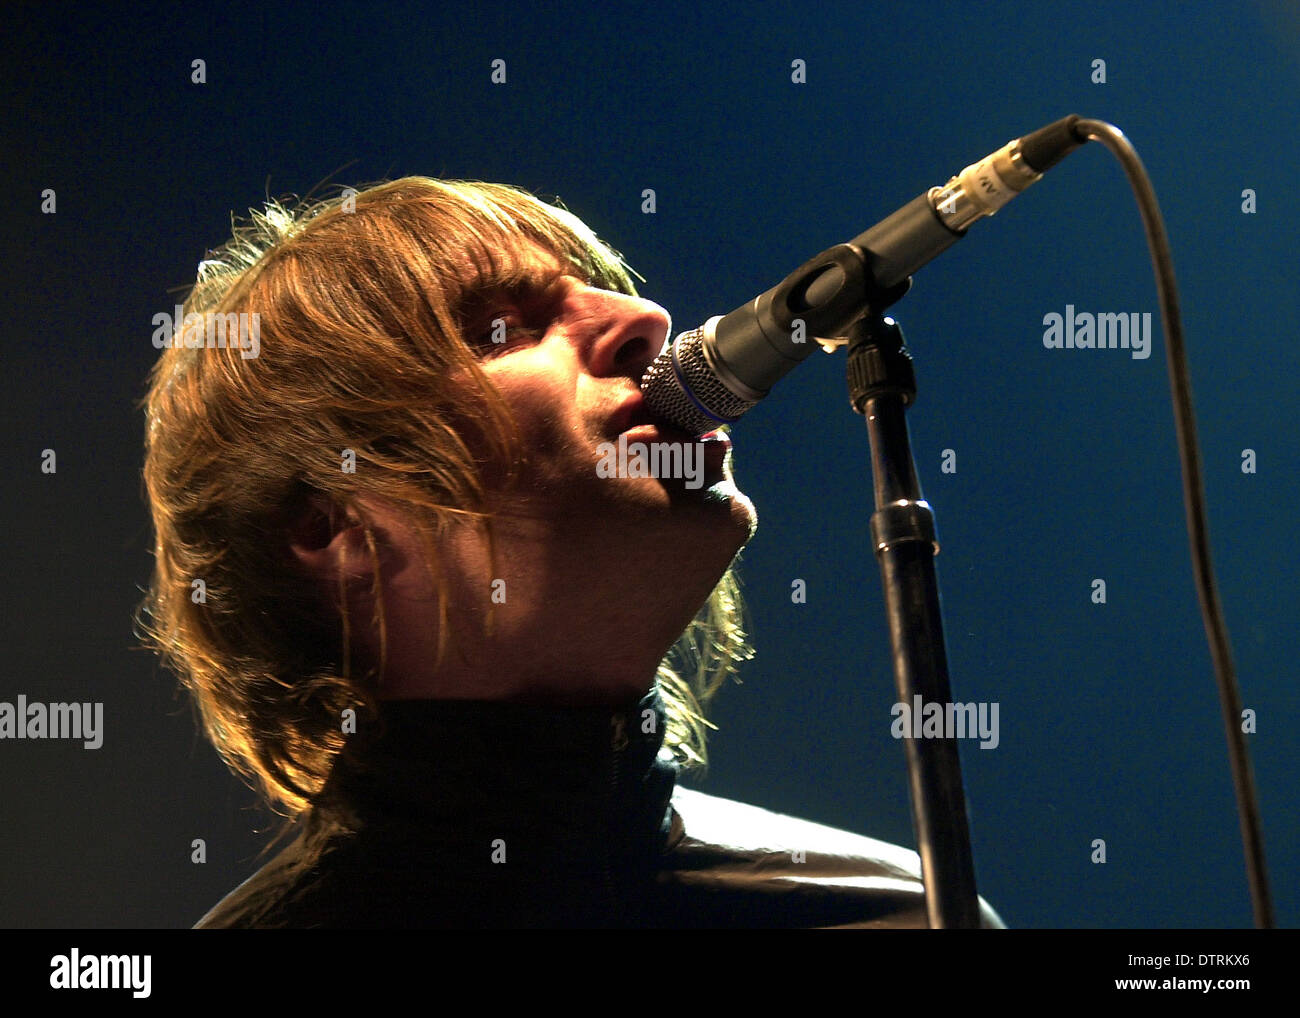 Oasis frontman Liam Gallagher 18/12/02 Foto Stock